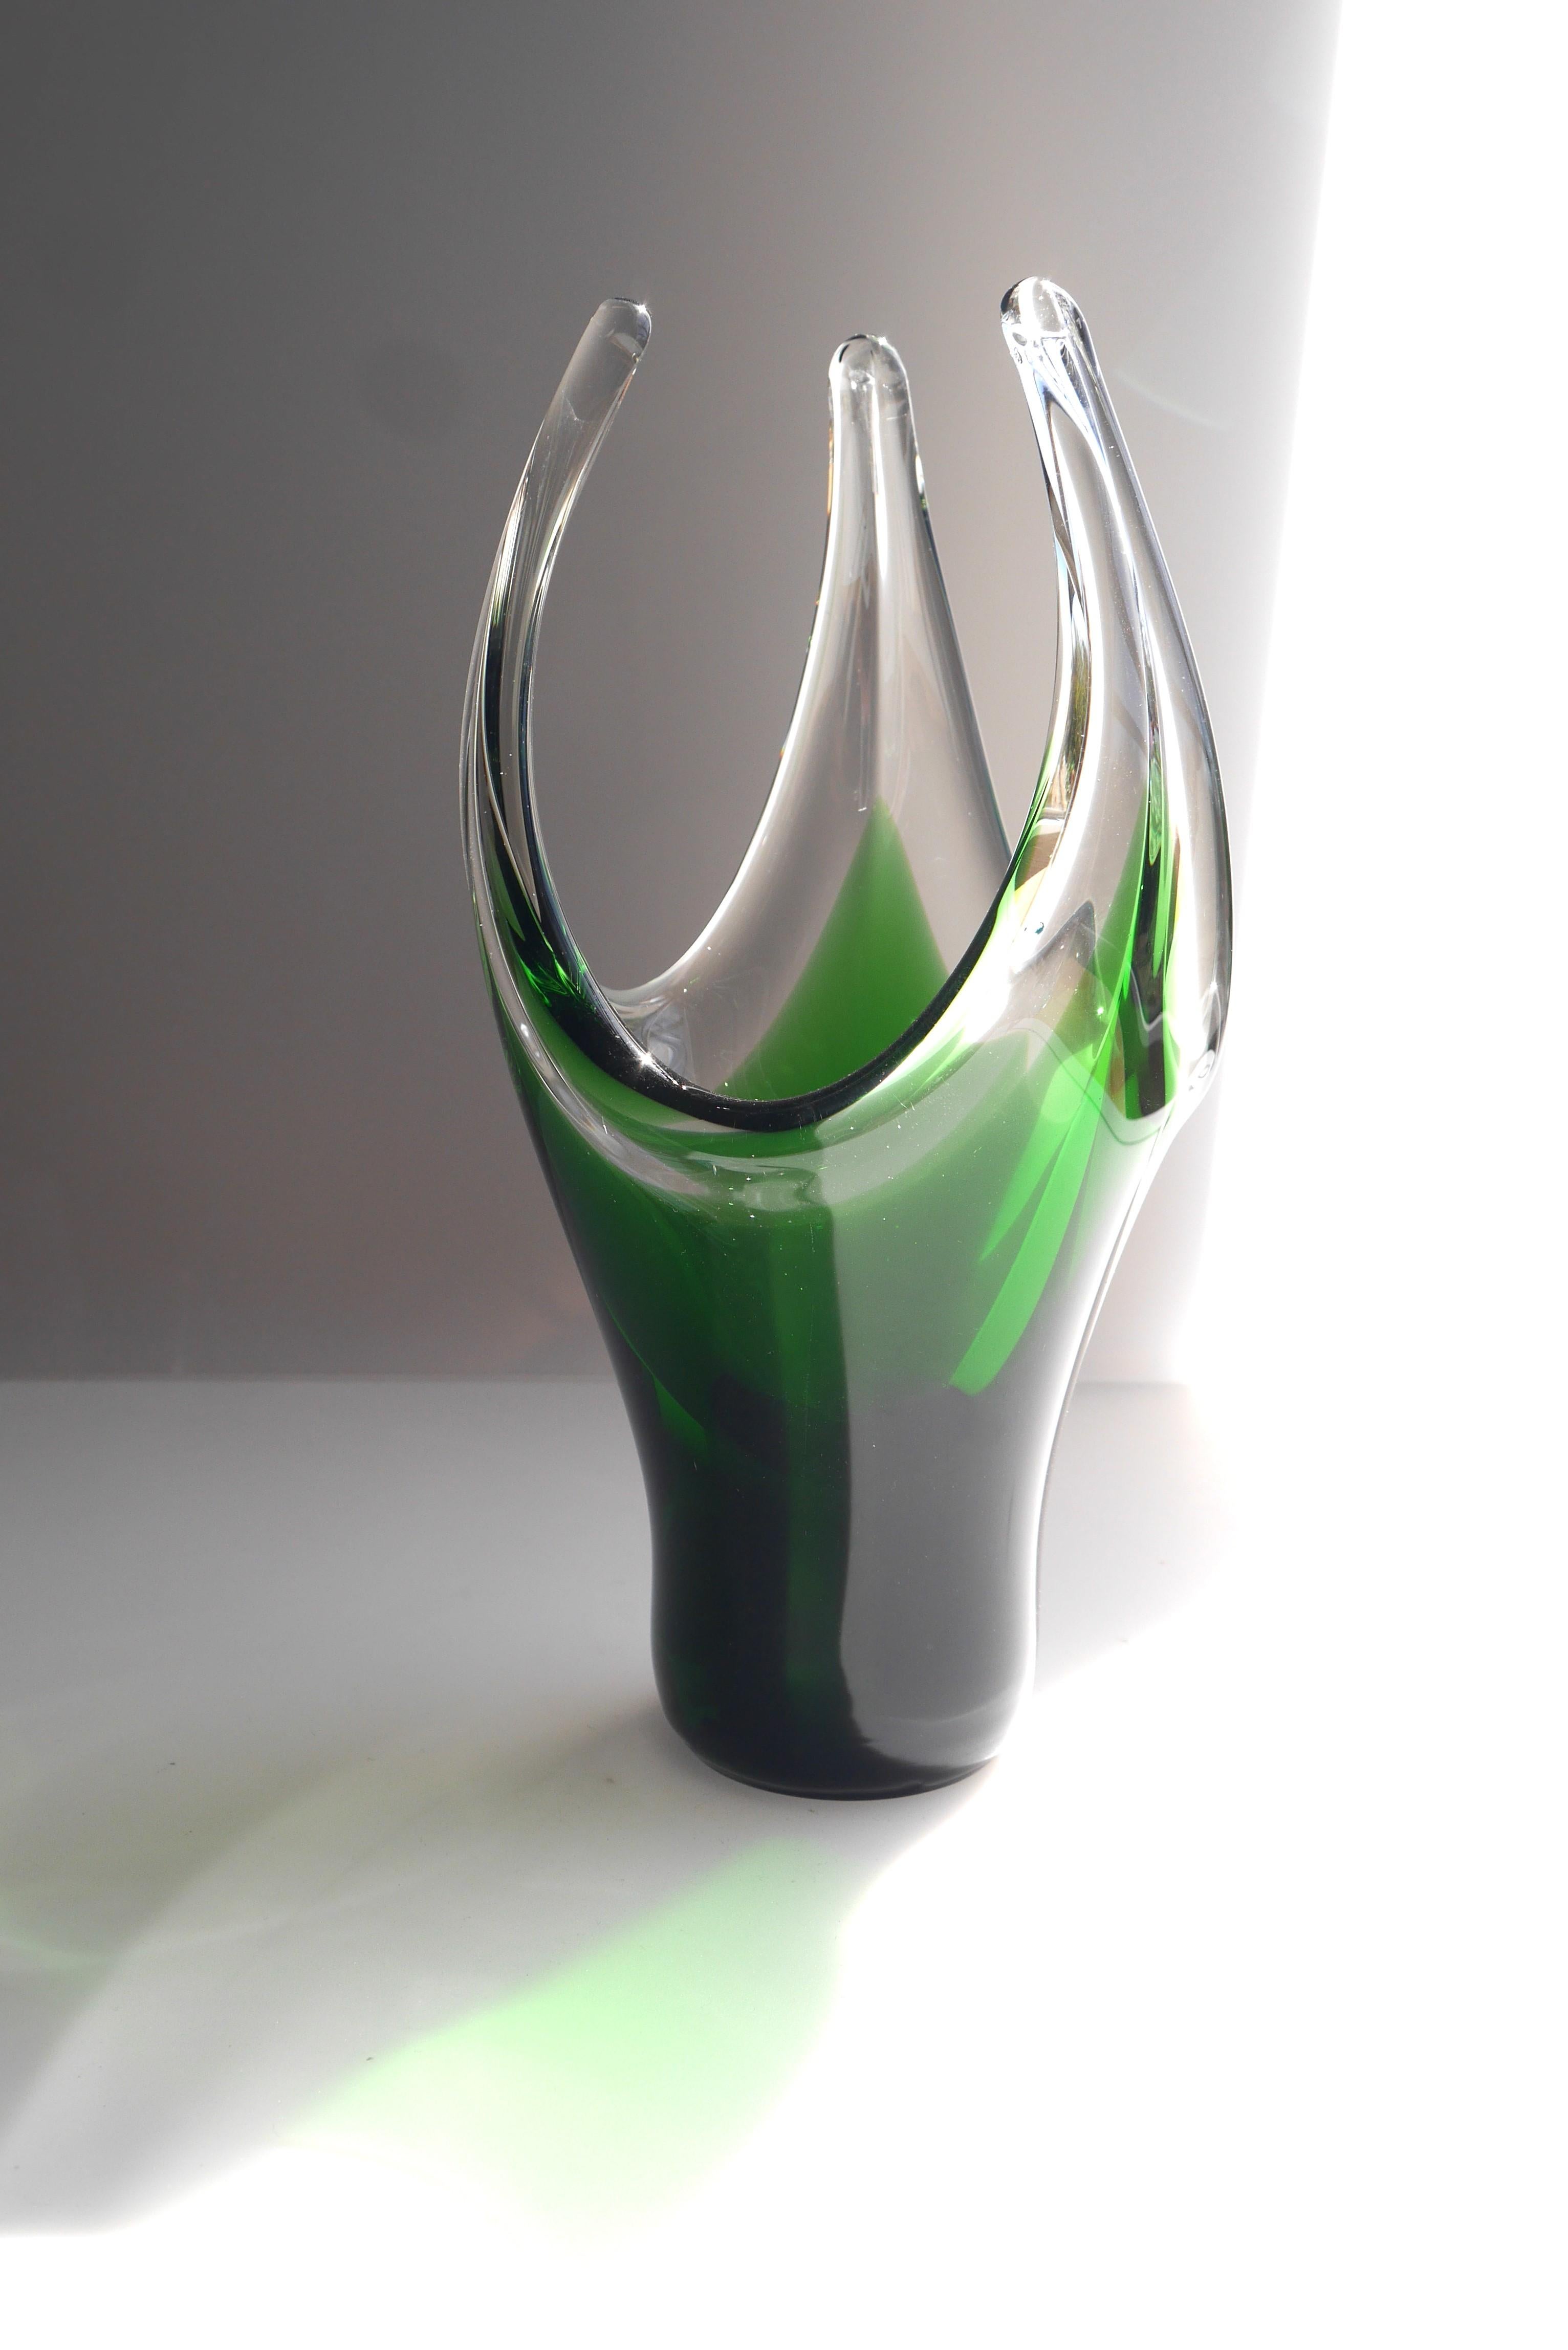 A fantastic handmade and signed emerald green glass vase by the master of crystal Jan Johansson for Orrefors, Sweden. 1950s - 1960s. This vase has a fantastic shape, yet it is the amazing colour that really makes this a statement piece, the center